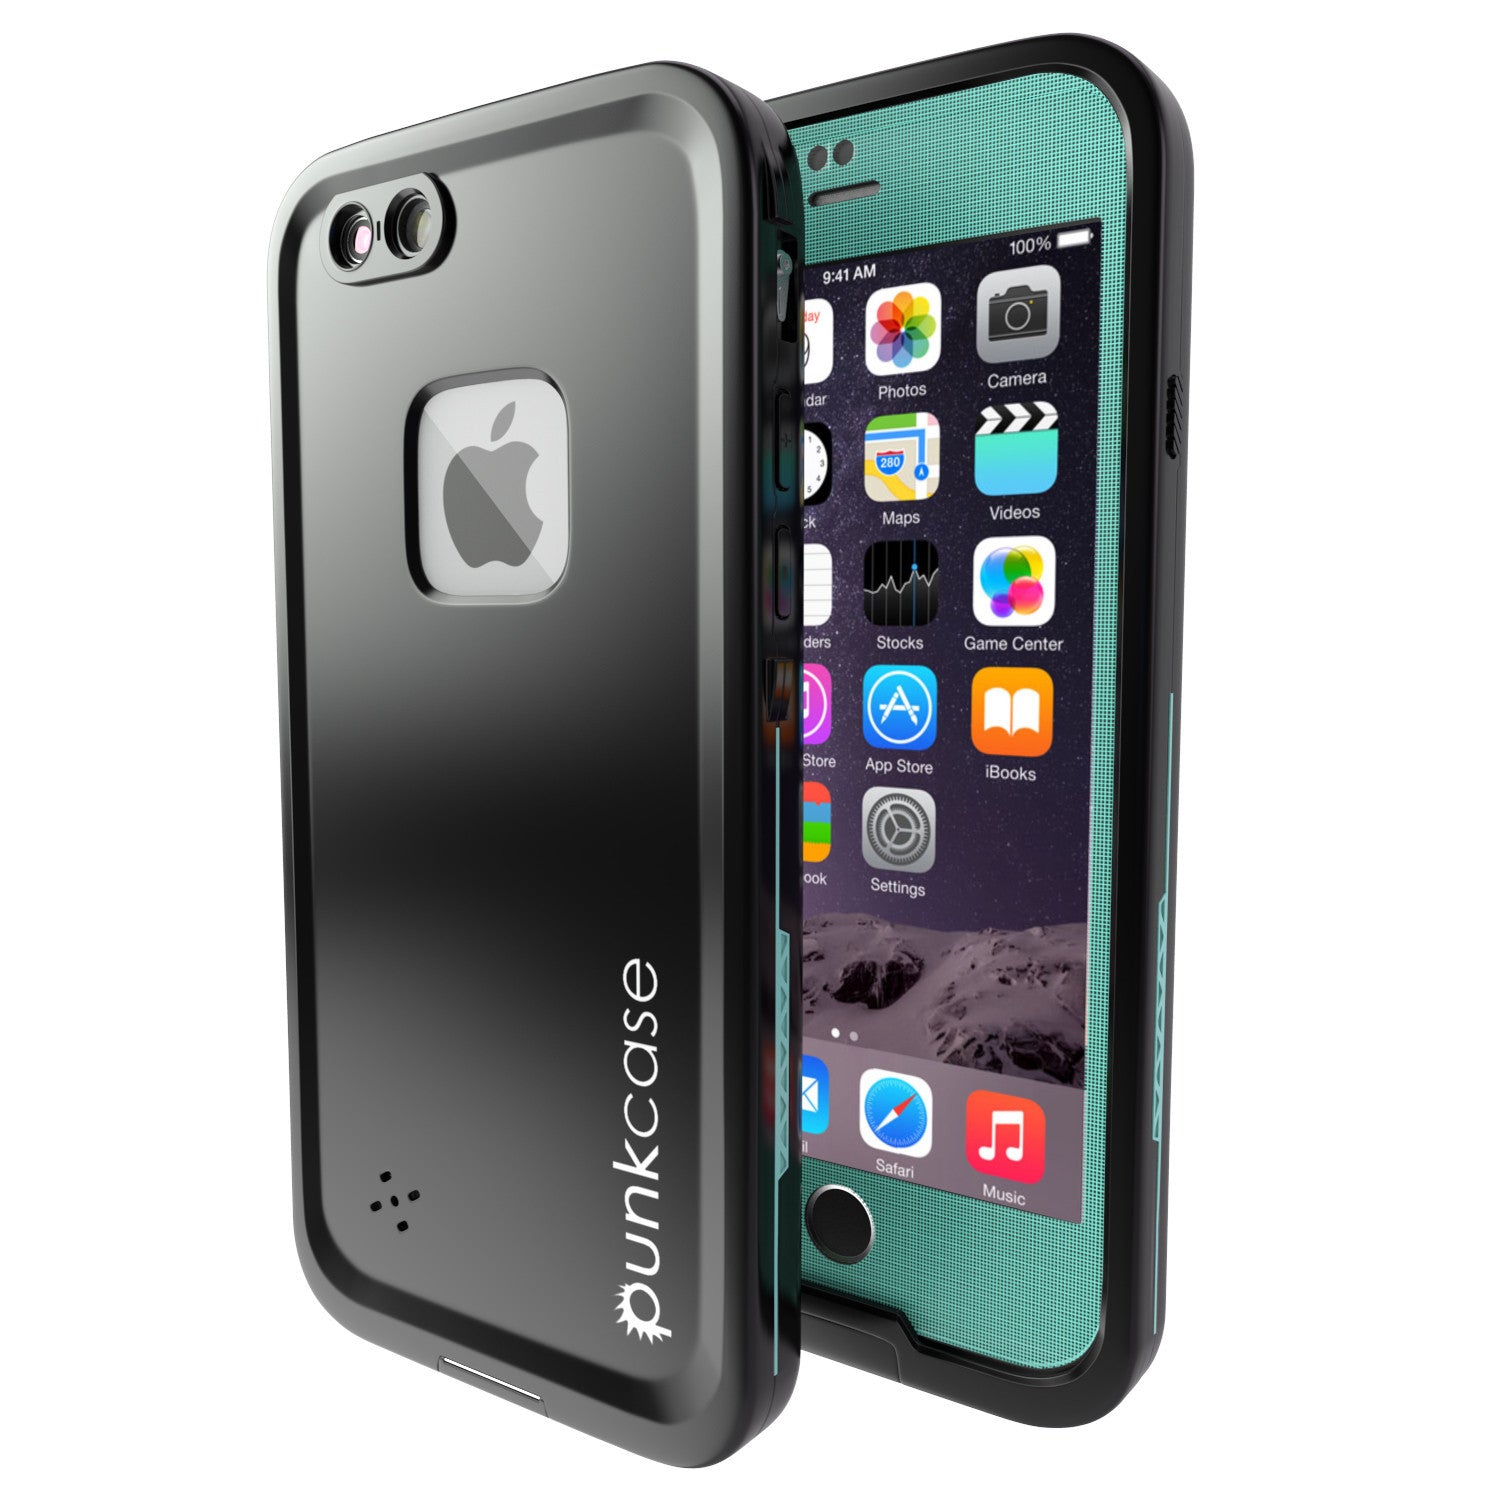 iPhone 6S/6 Waterproof Case, Punkcase SpikeStar Teal | Thin Fit 6.6ft Underwater IP68 | Warranty (Color in image: teal)